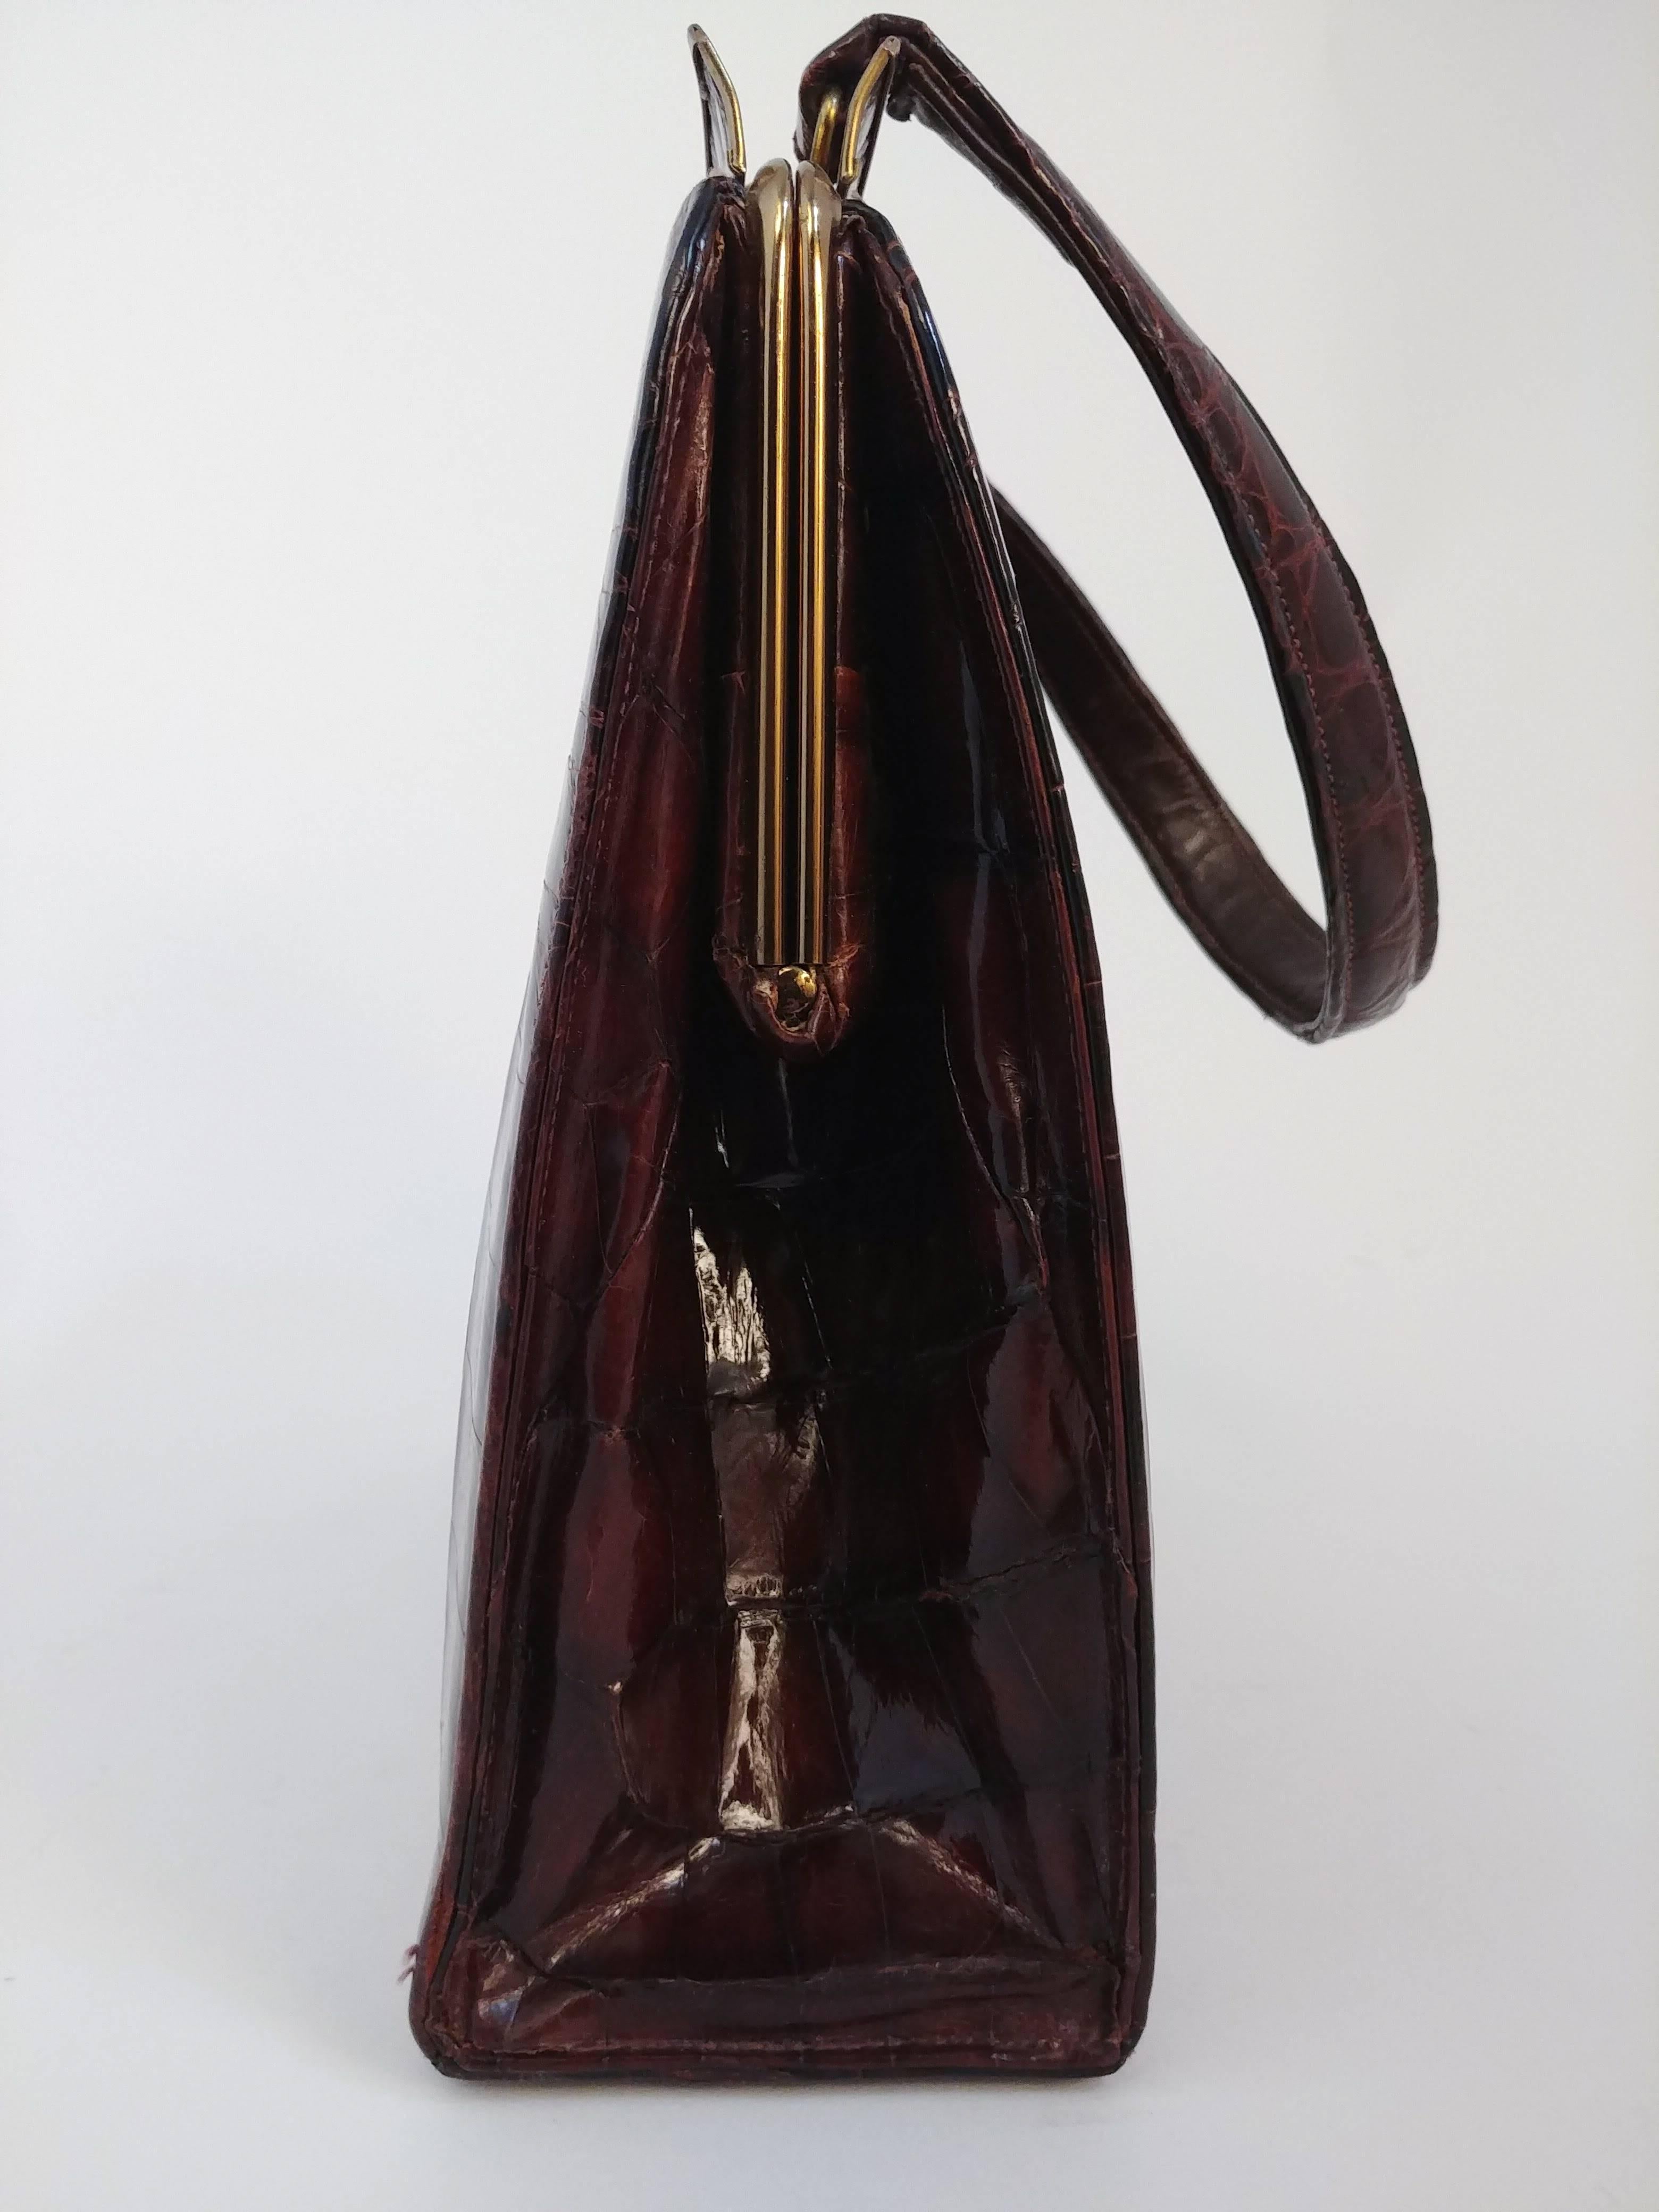 1950s Brown Alligator Handbag. Gold toned hardware and tan leather lining. Comes with small mirror. 